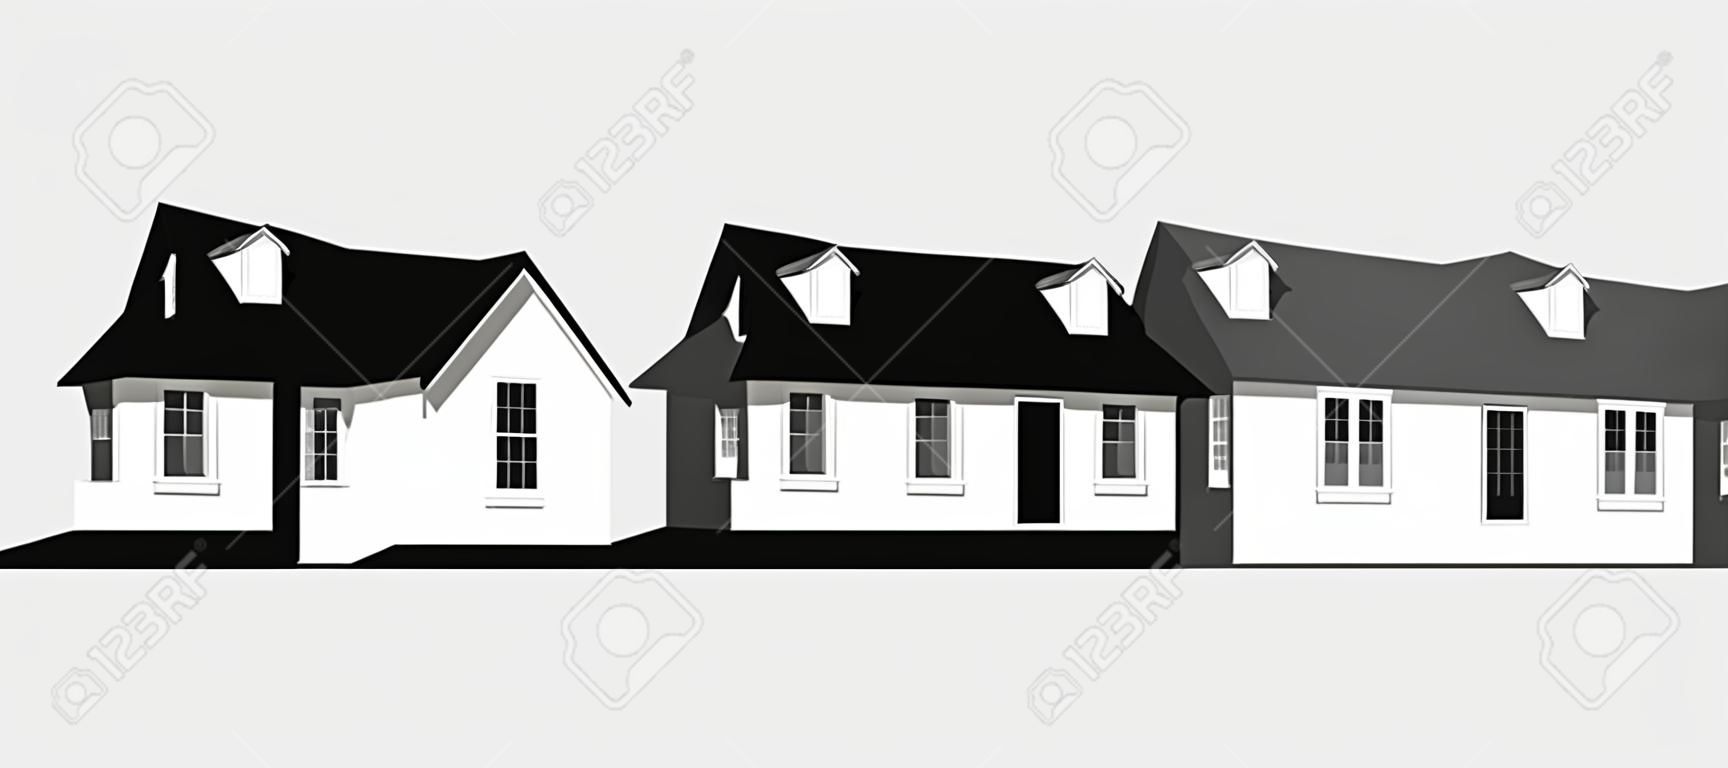 House symbol border. A row of homes with 2 dormer windows for sale, for real estate, construction, architecture, home repair designs.